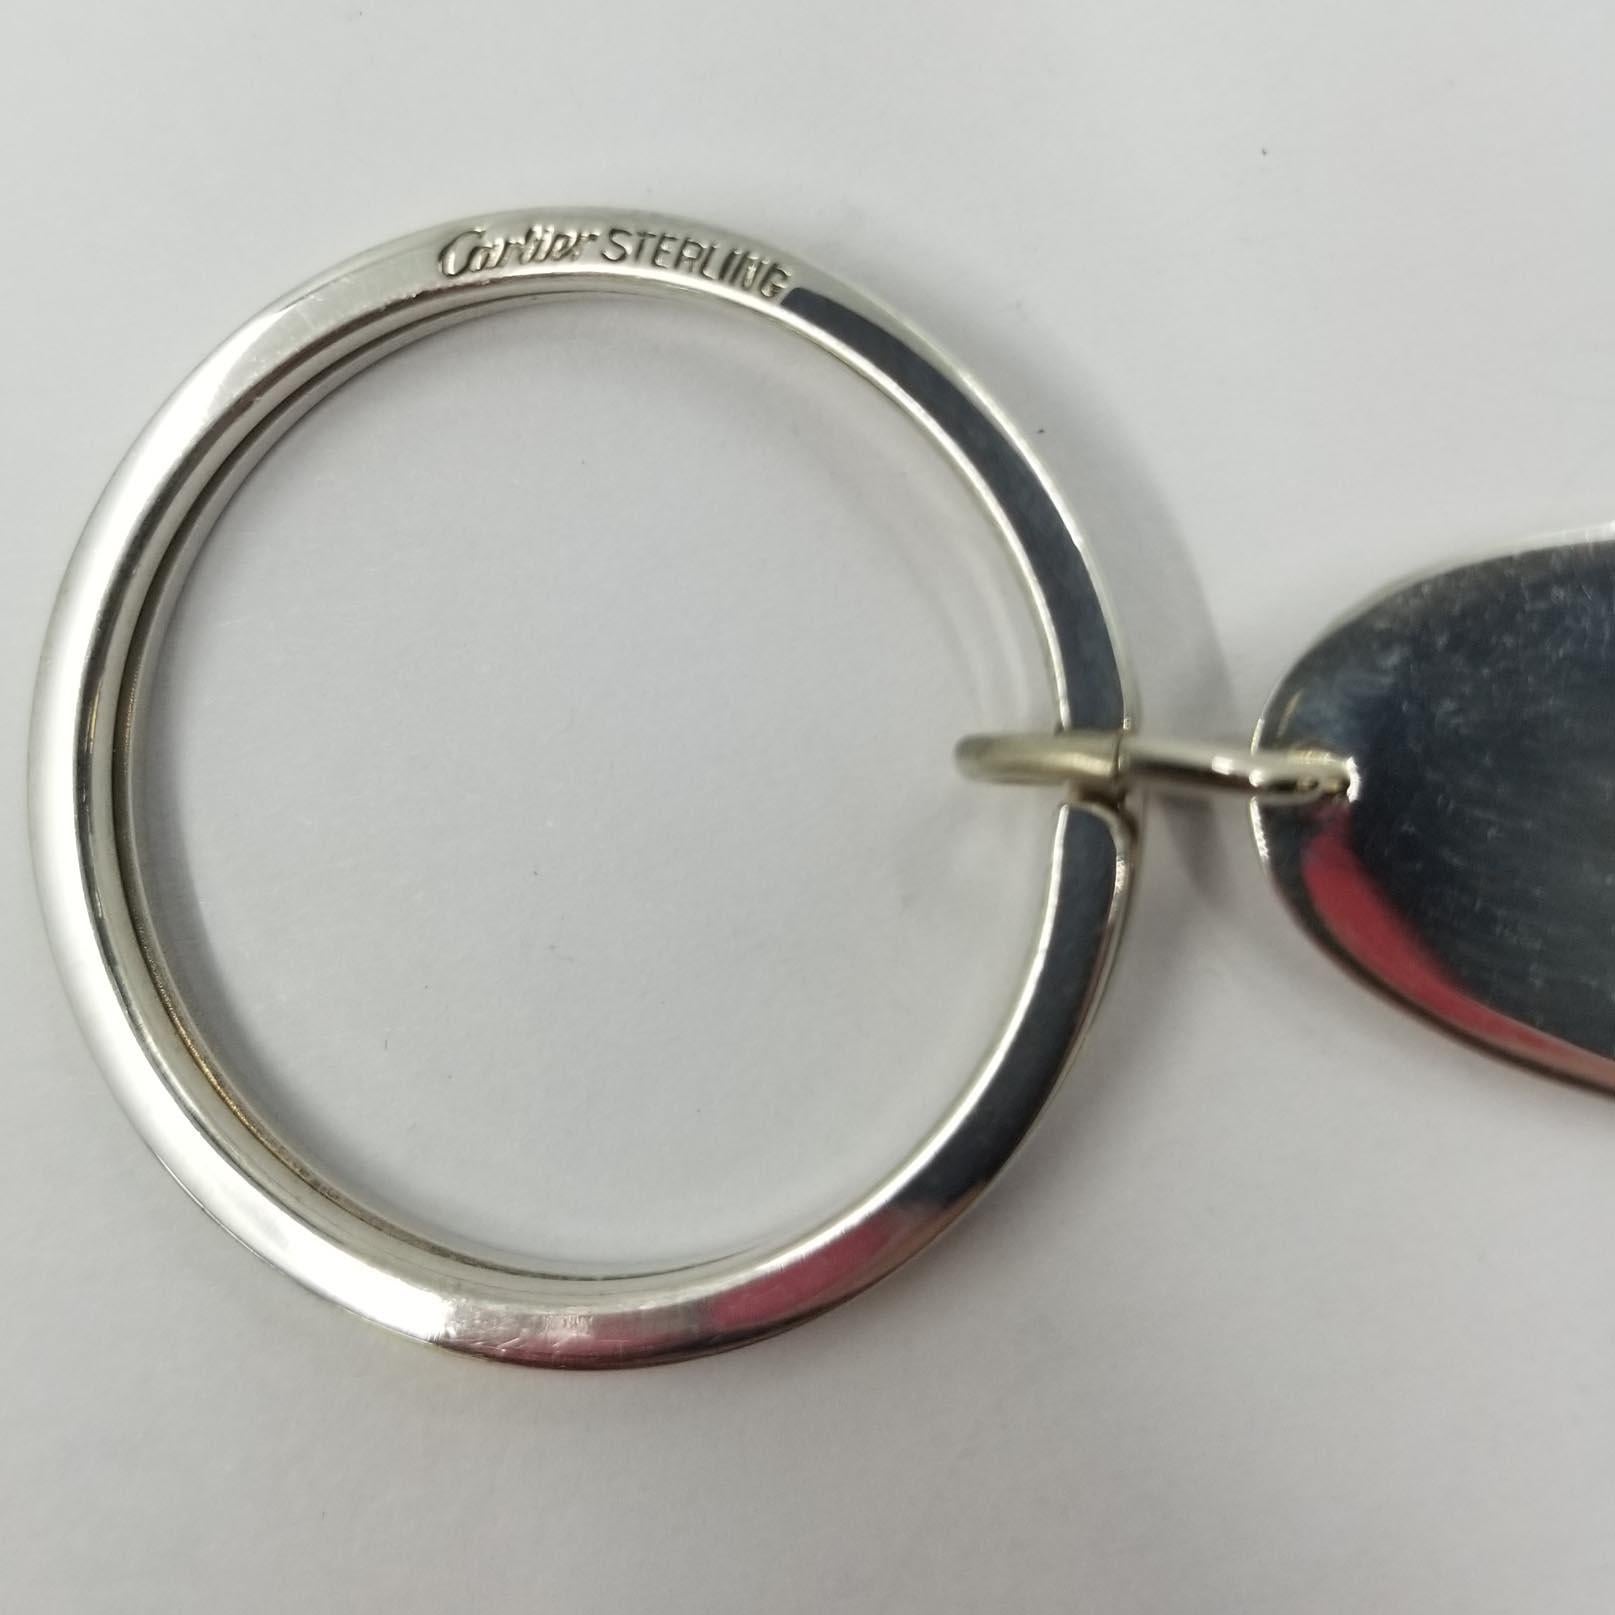 This engravable key ring is designed by Cartier. Both the ring and the flat oval disc charm are sterling silver. The ring is signed Cartier Sterling, and the charm is stamped Sterling. Approximate length is 2.5 inches.